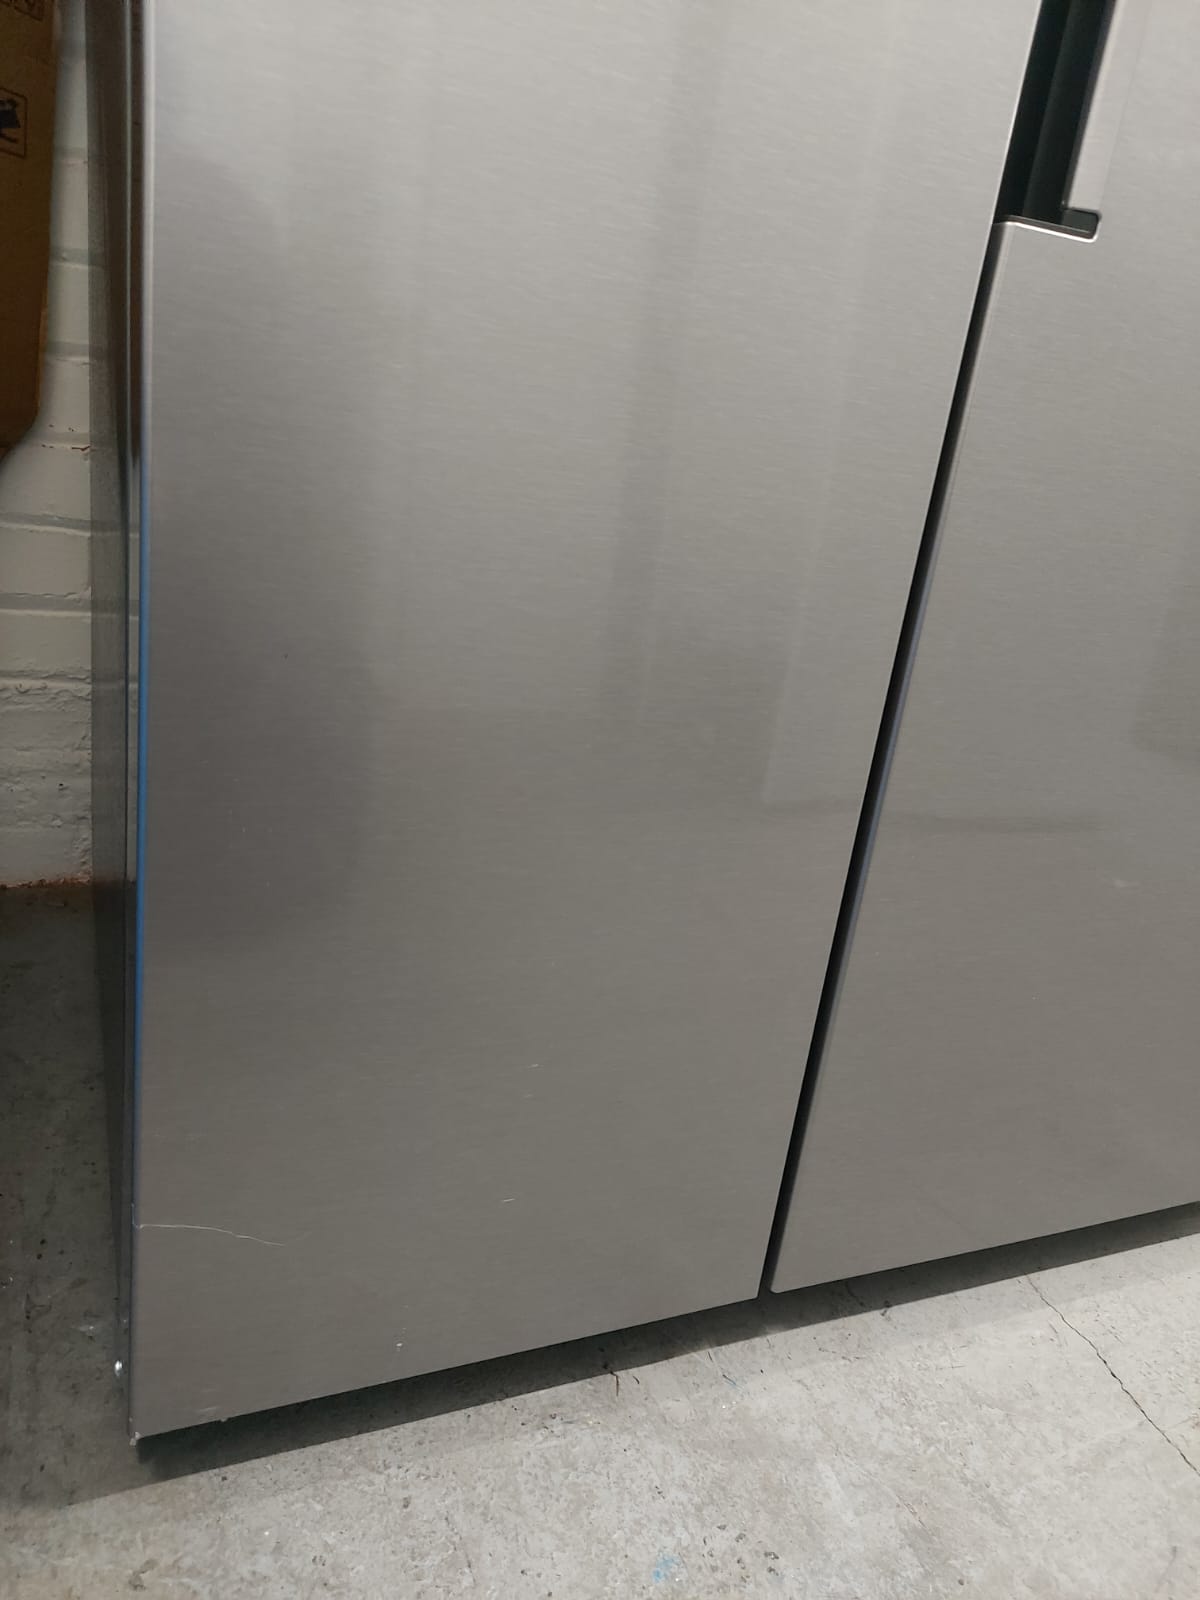 Beko ASP33B32VPS American Fridge Freezer with Water and Ice Dispenser - Frost Free - Silver